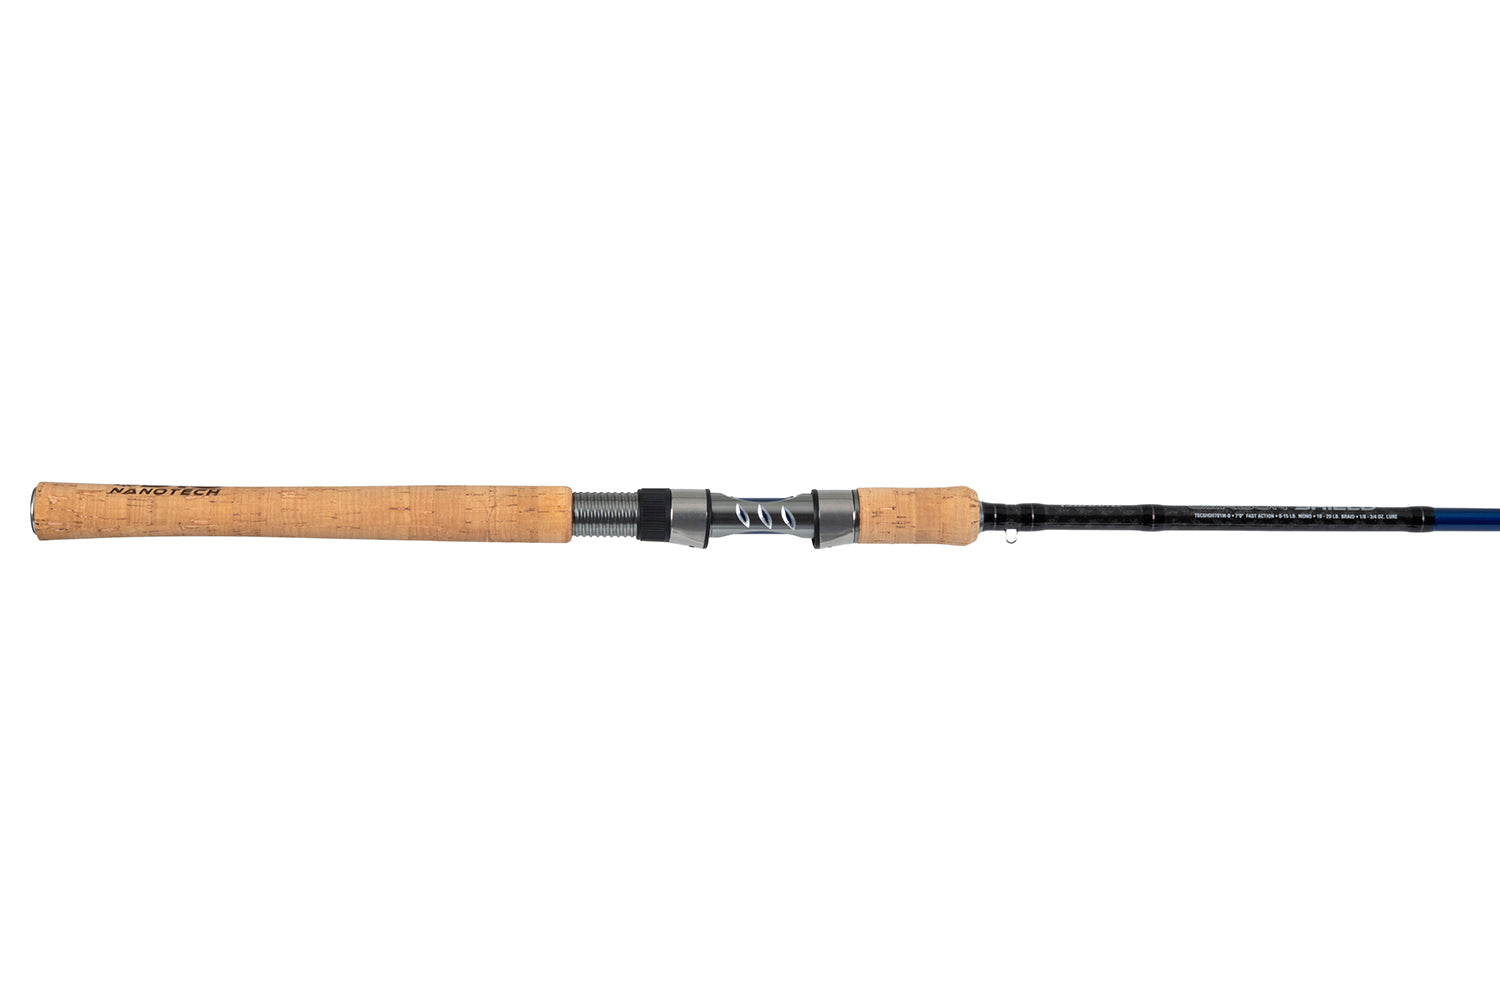 Carbon Surf Fishing Rod Spinning Fishing Rod 2 Sections Sea